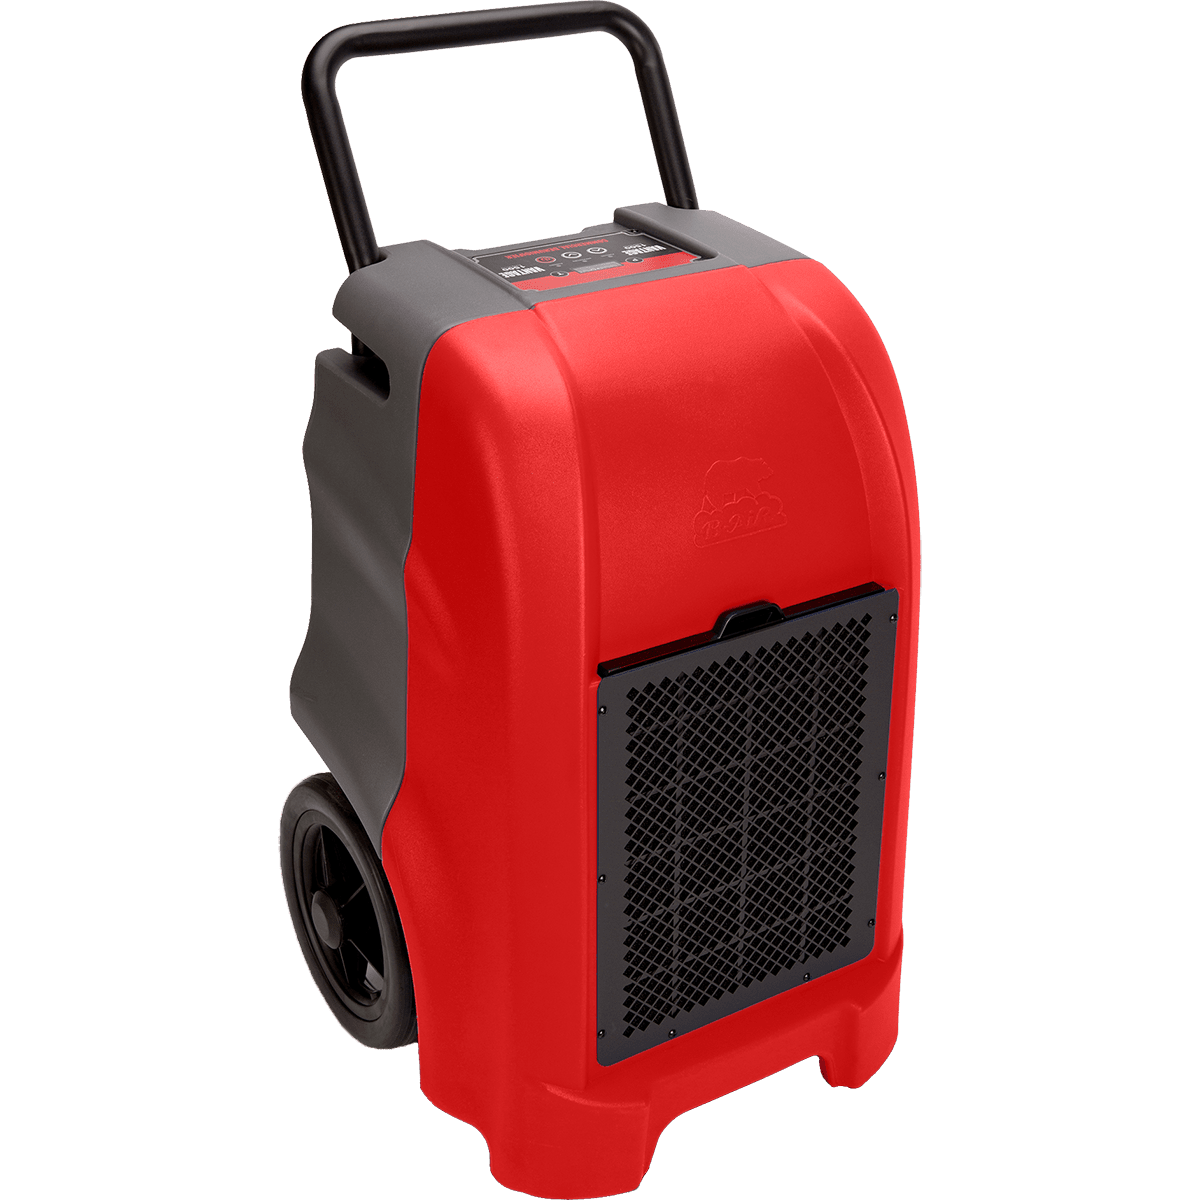 B-Air Vantage 1500 Dehumidifier - Red - Primary View